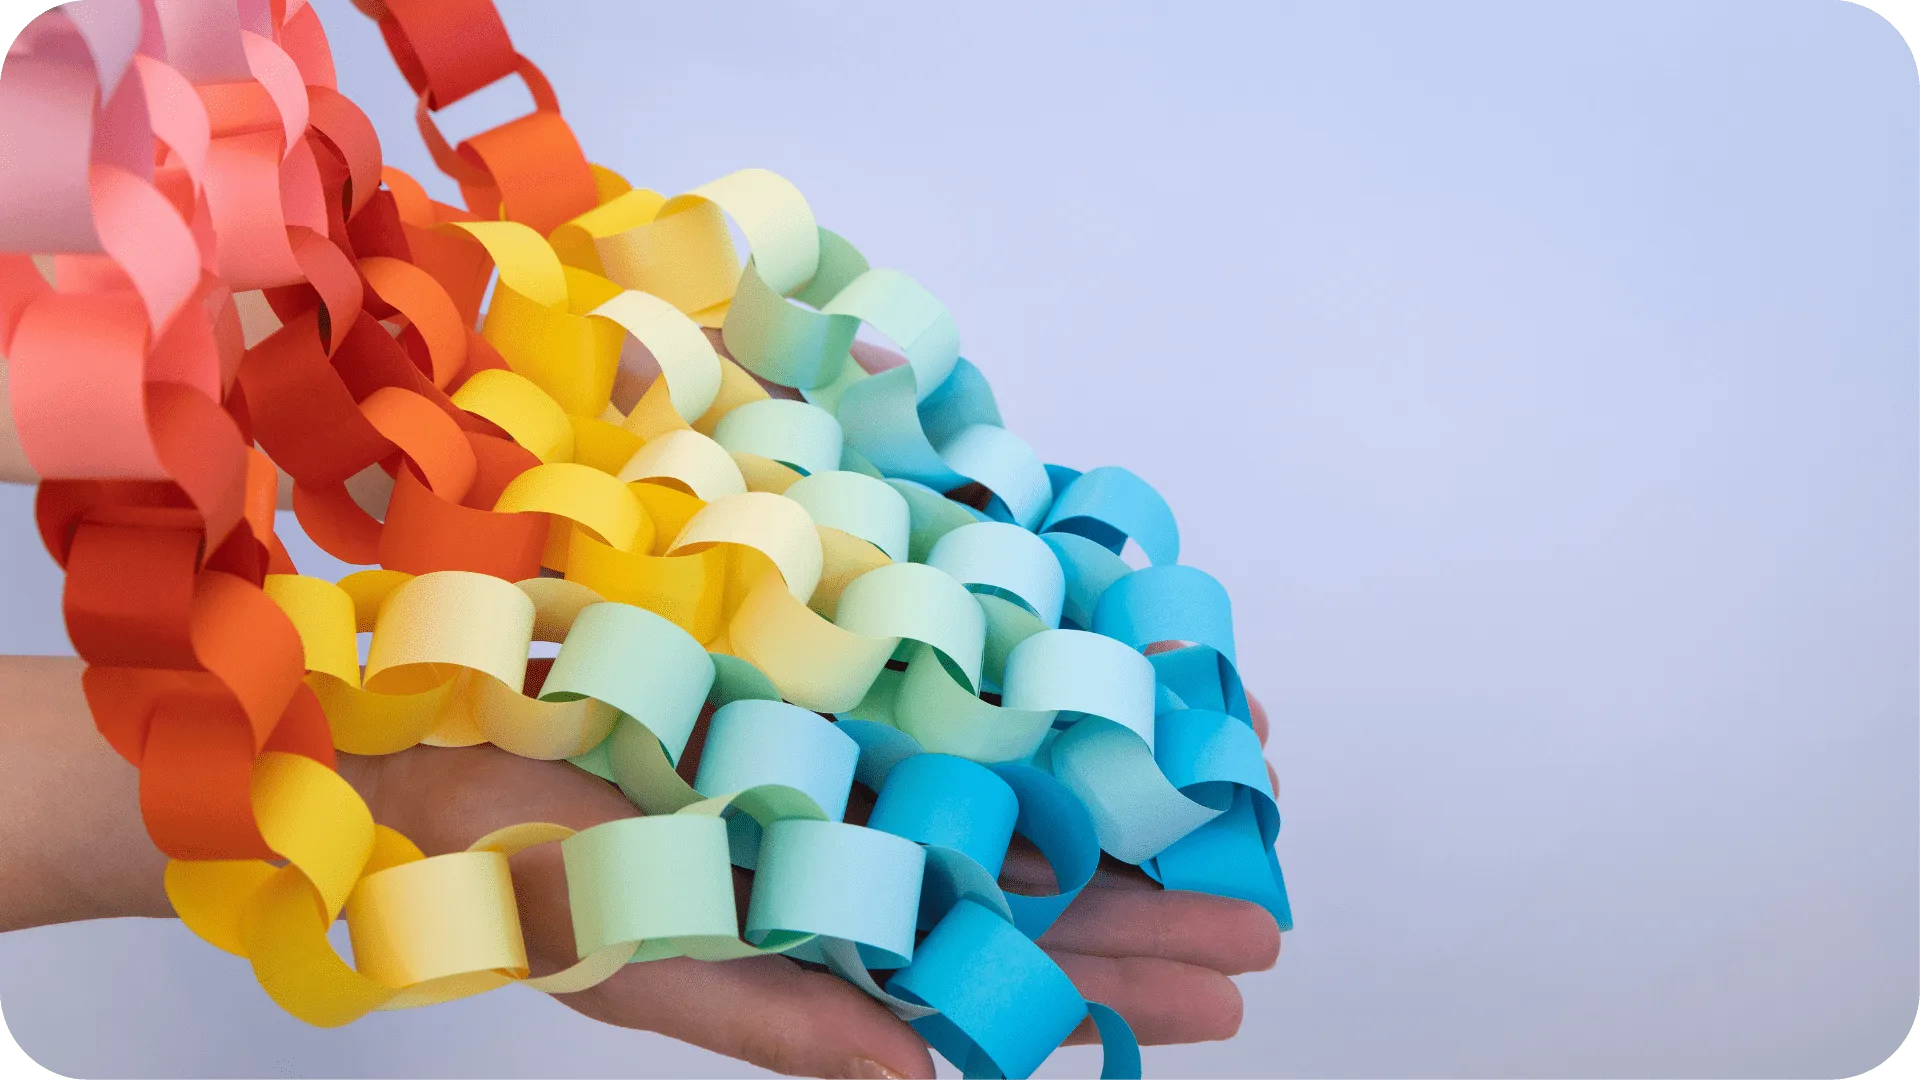 Photograph of multi-coloured paper chains falling onto a hand.